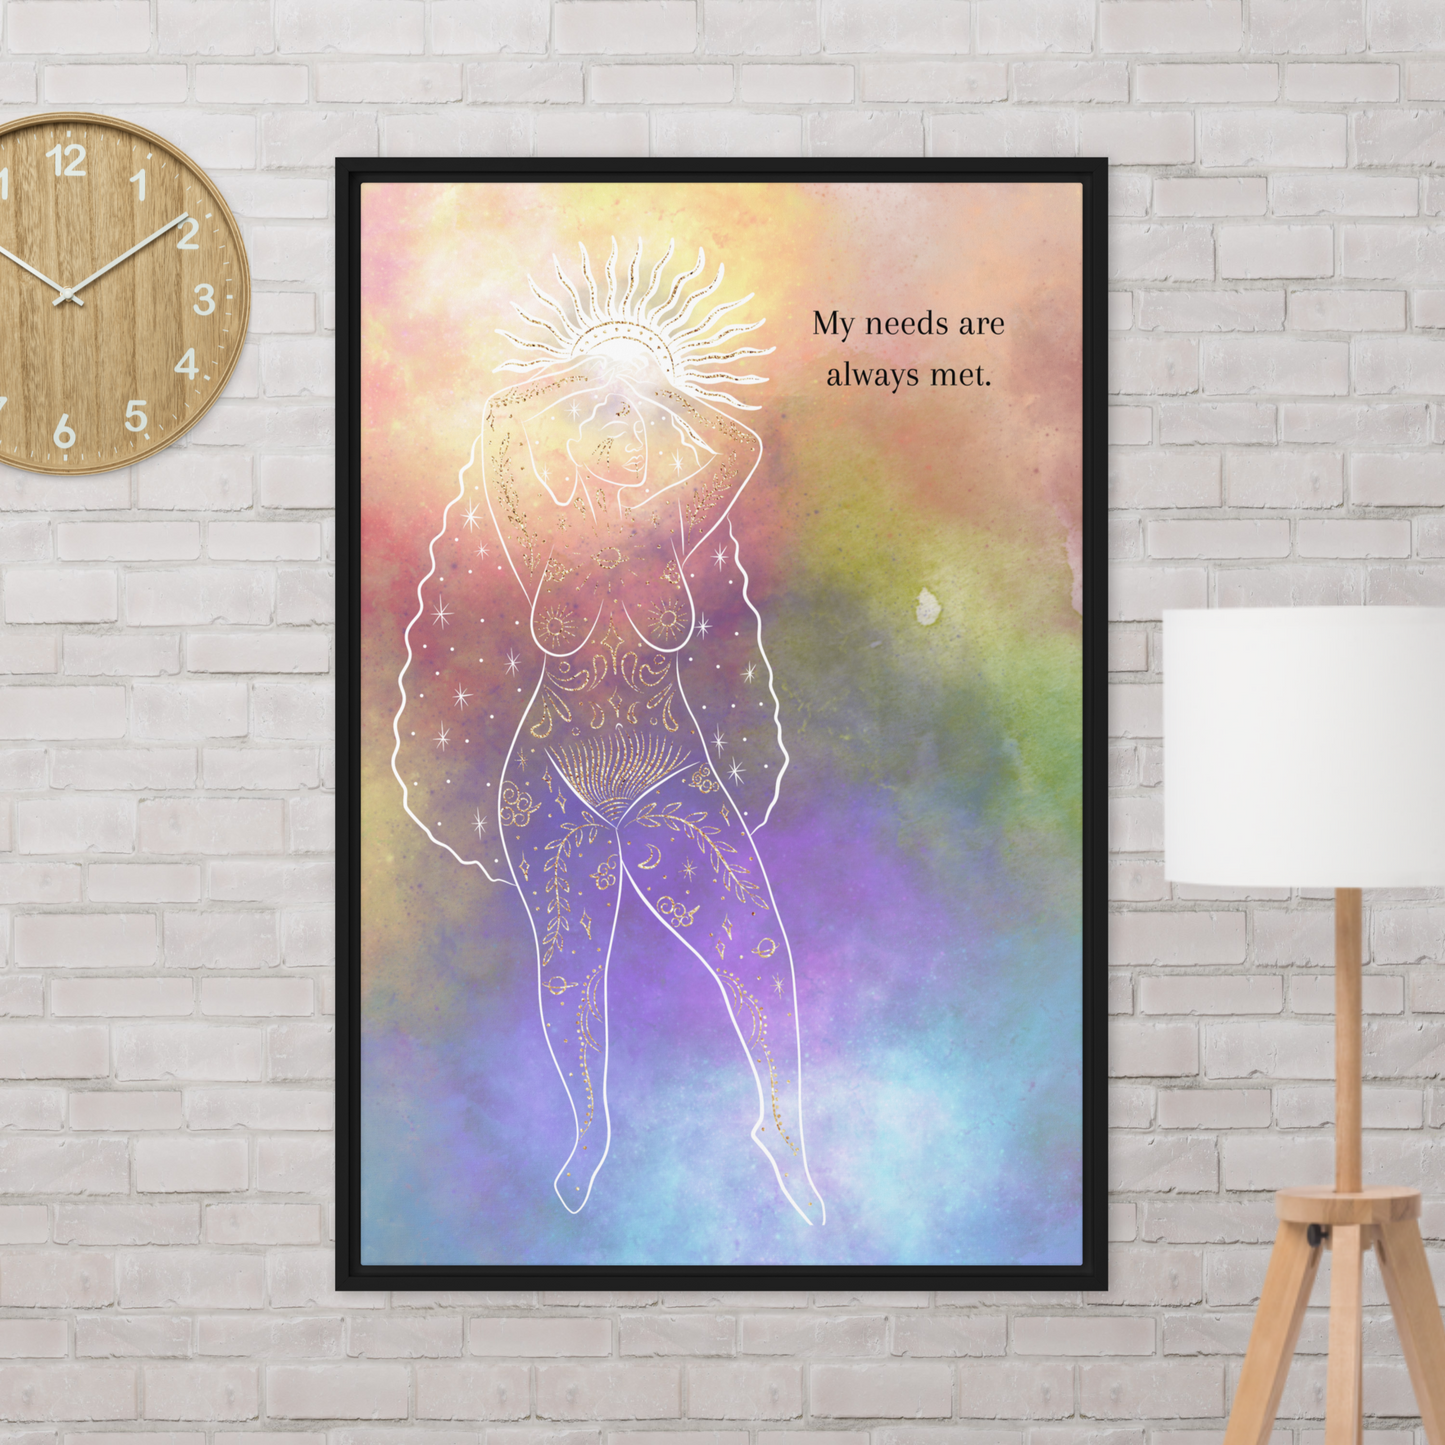 Trust the Universe Printable Wall Art - Empowering Spiritual Decor for Personal Growth & Positivity